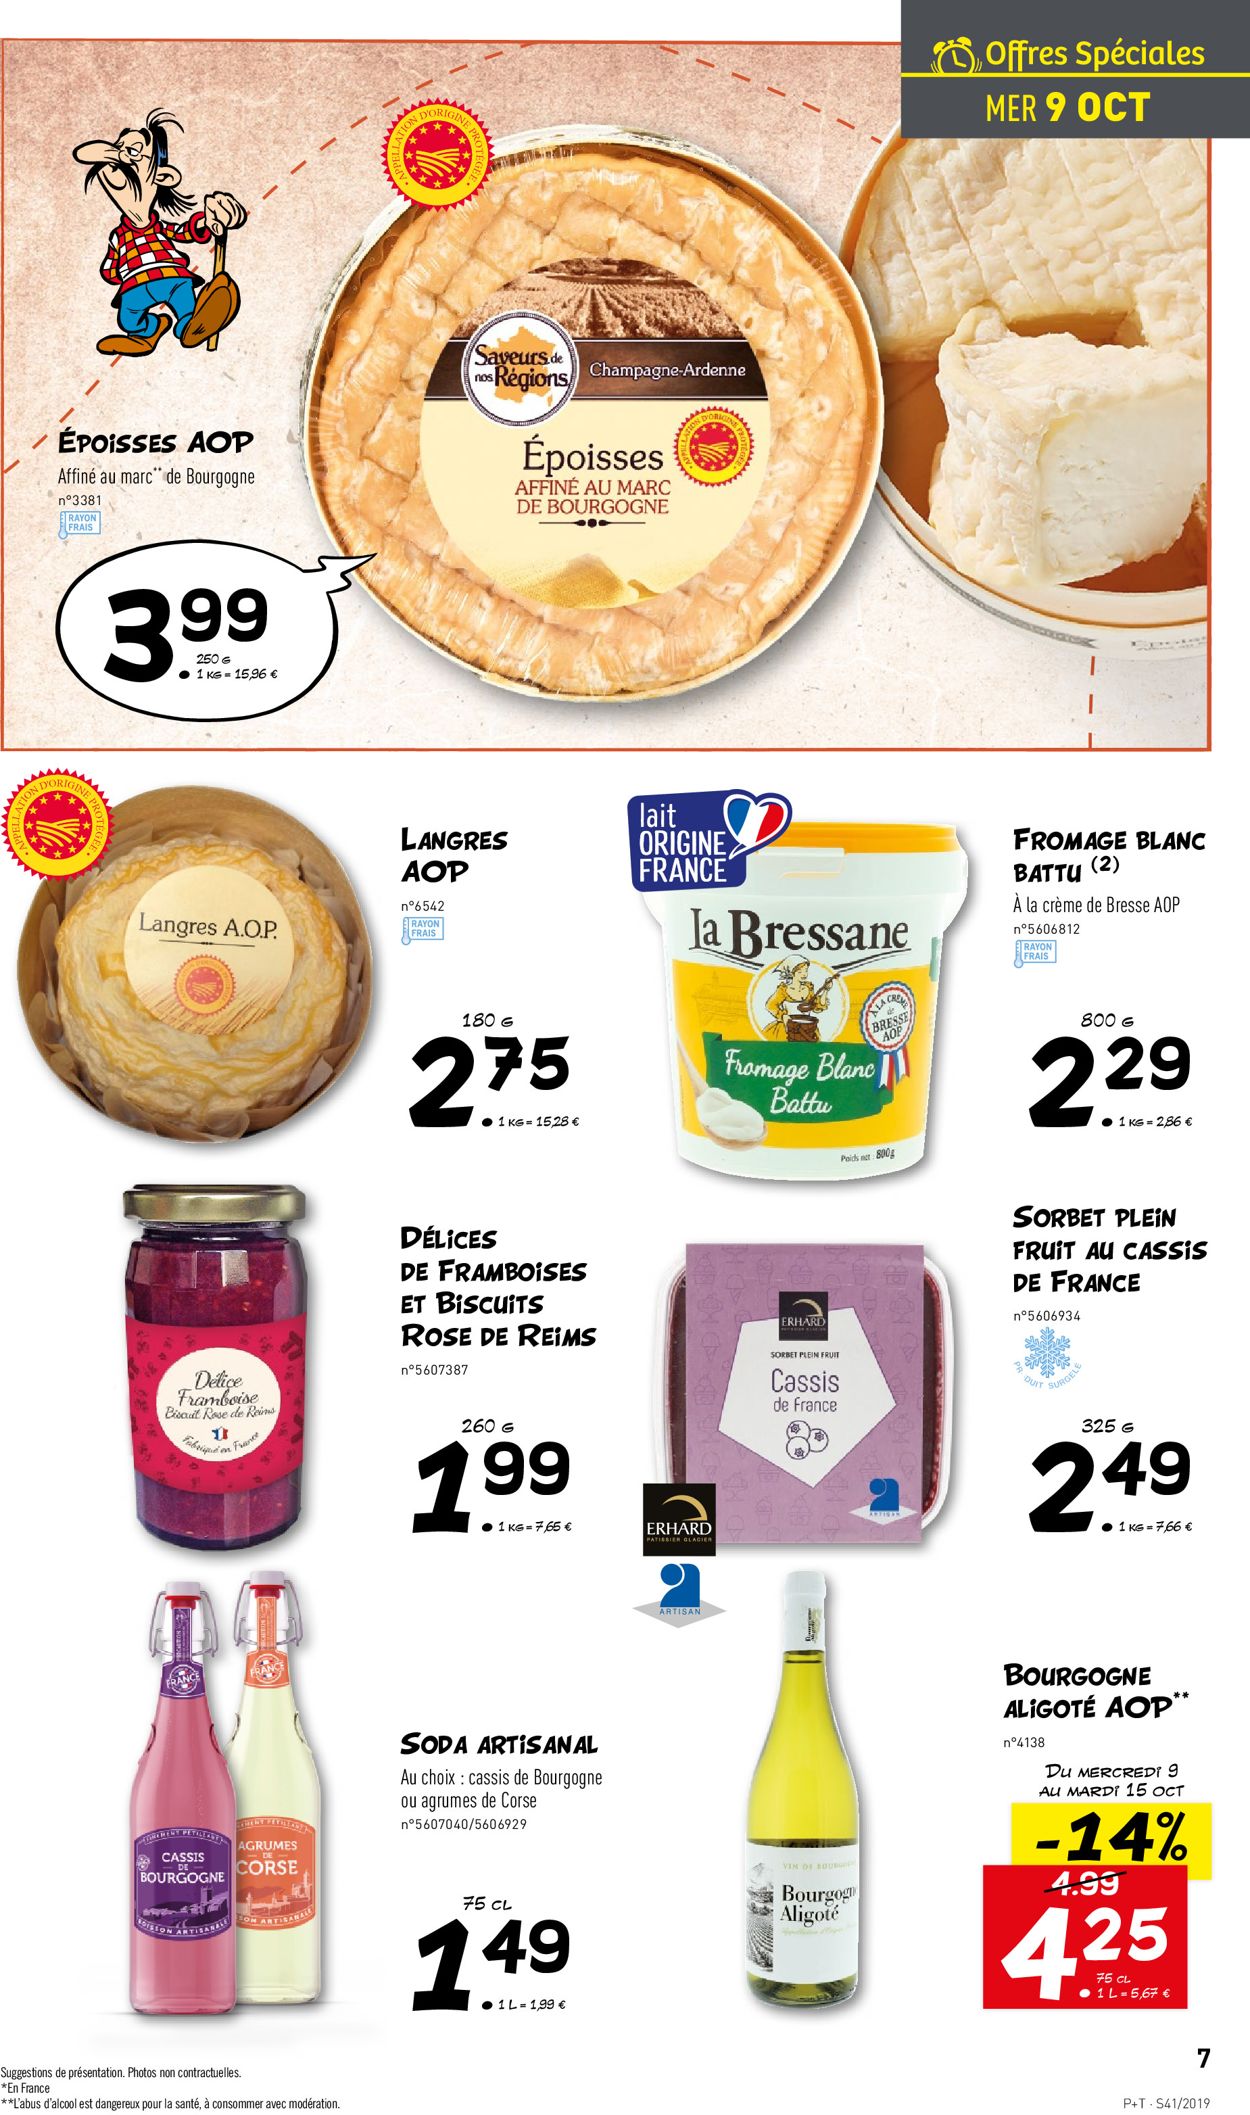 Lidl Catalogue - 09.10-15.10.2019 (Page 7)